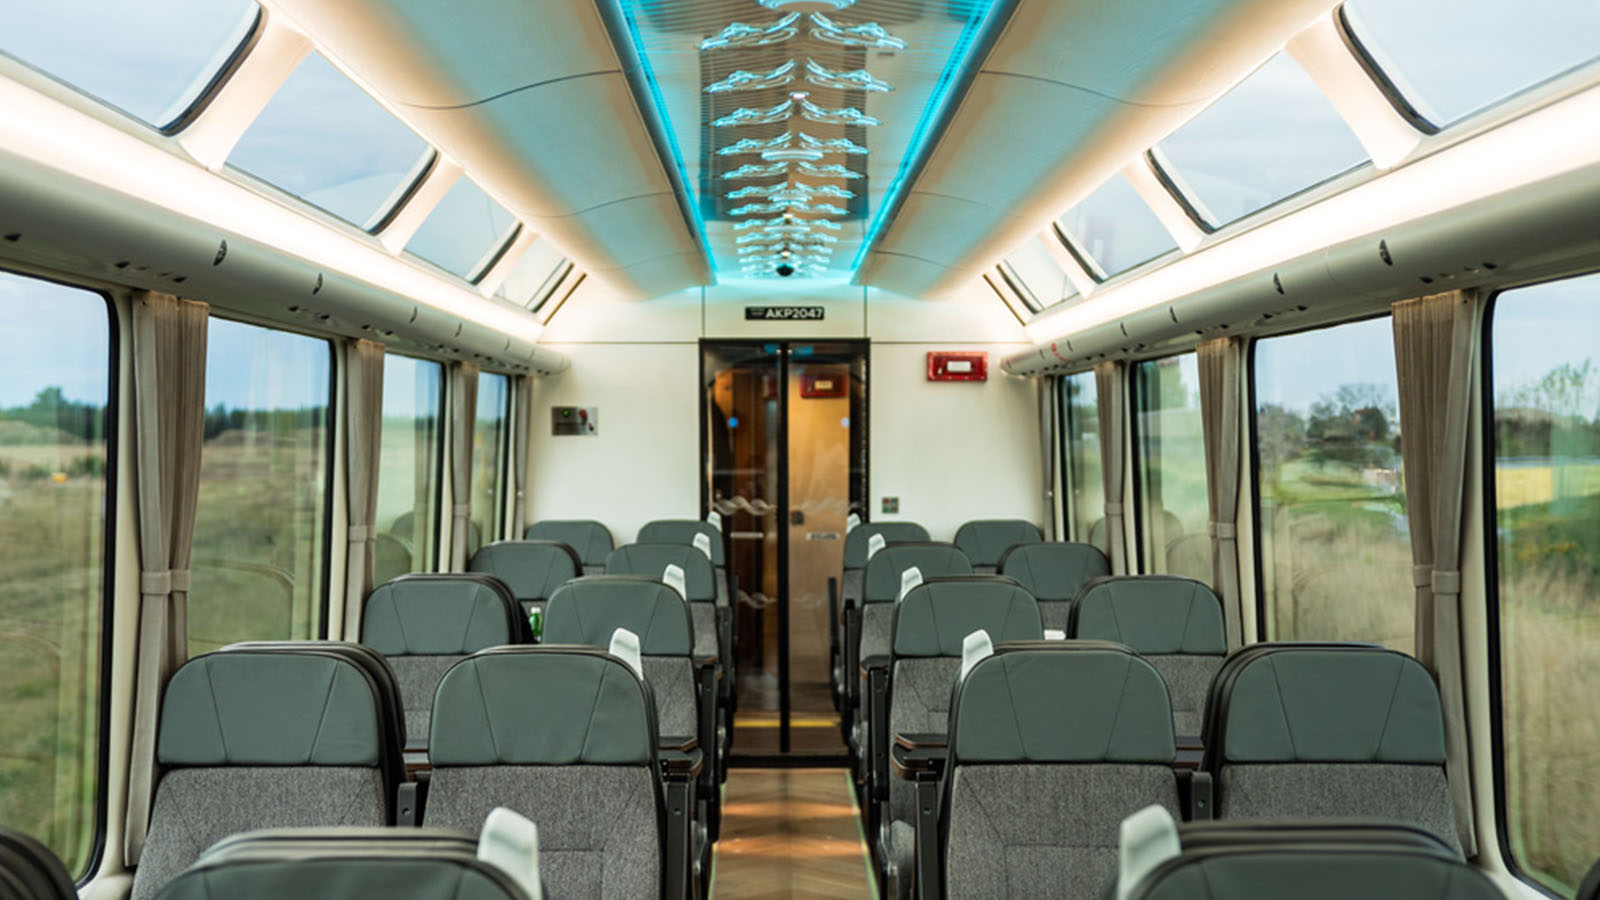  Luxury Scenic Plus train carriage launched